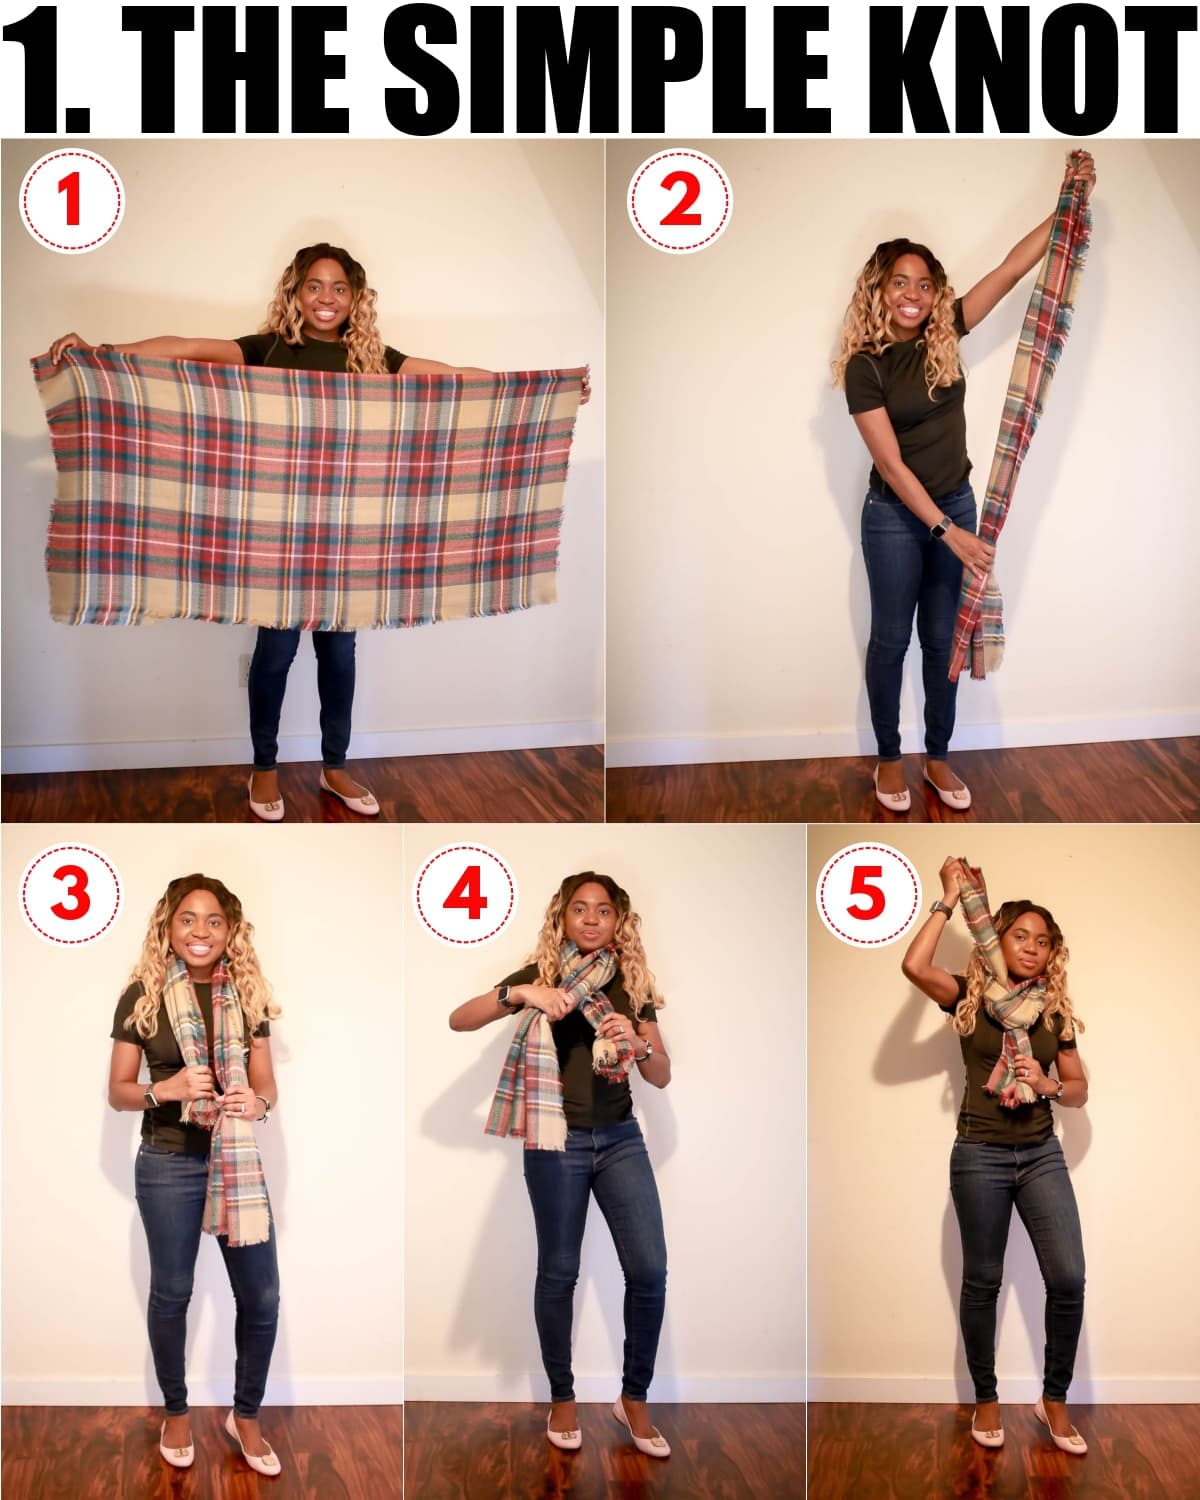 Ready to learn how to tie a blanket scarf quickly? I’ve rounded up the 5 easiest ways to wear a blanket scarf this season with photos.